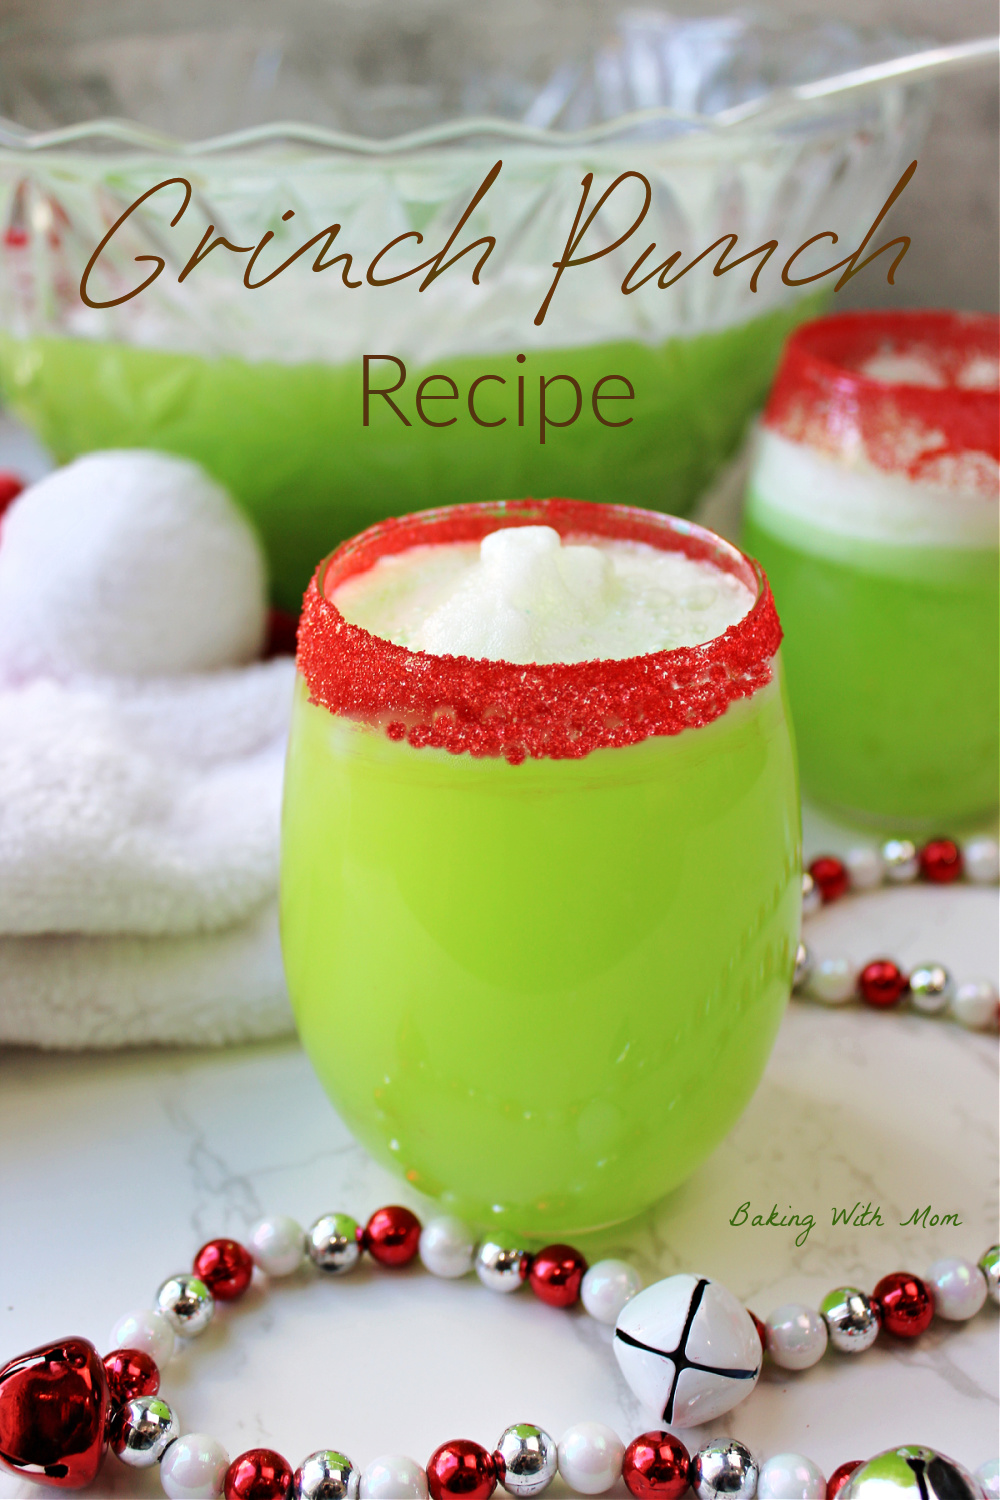 Grinch punch in a clear glass with red sanding sugar on rim. 